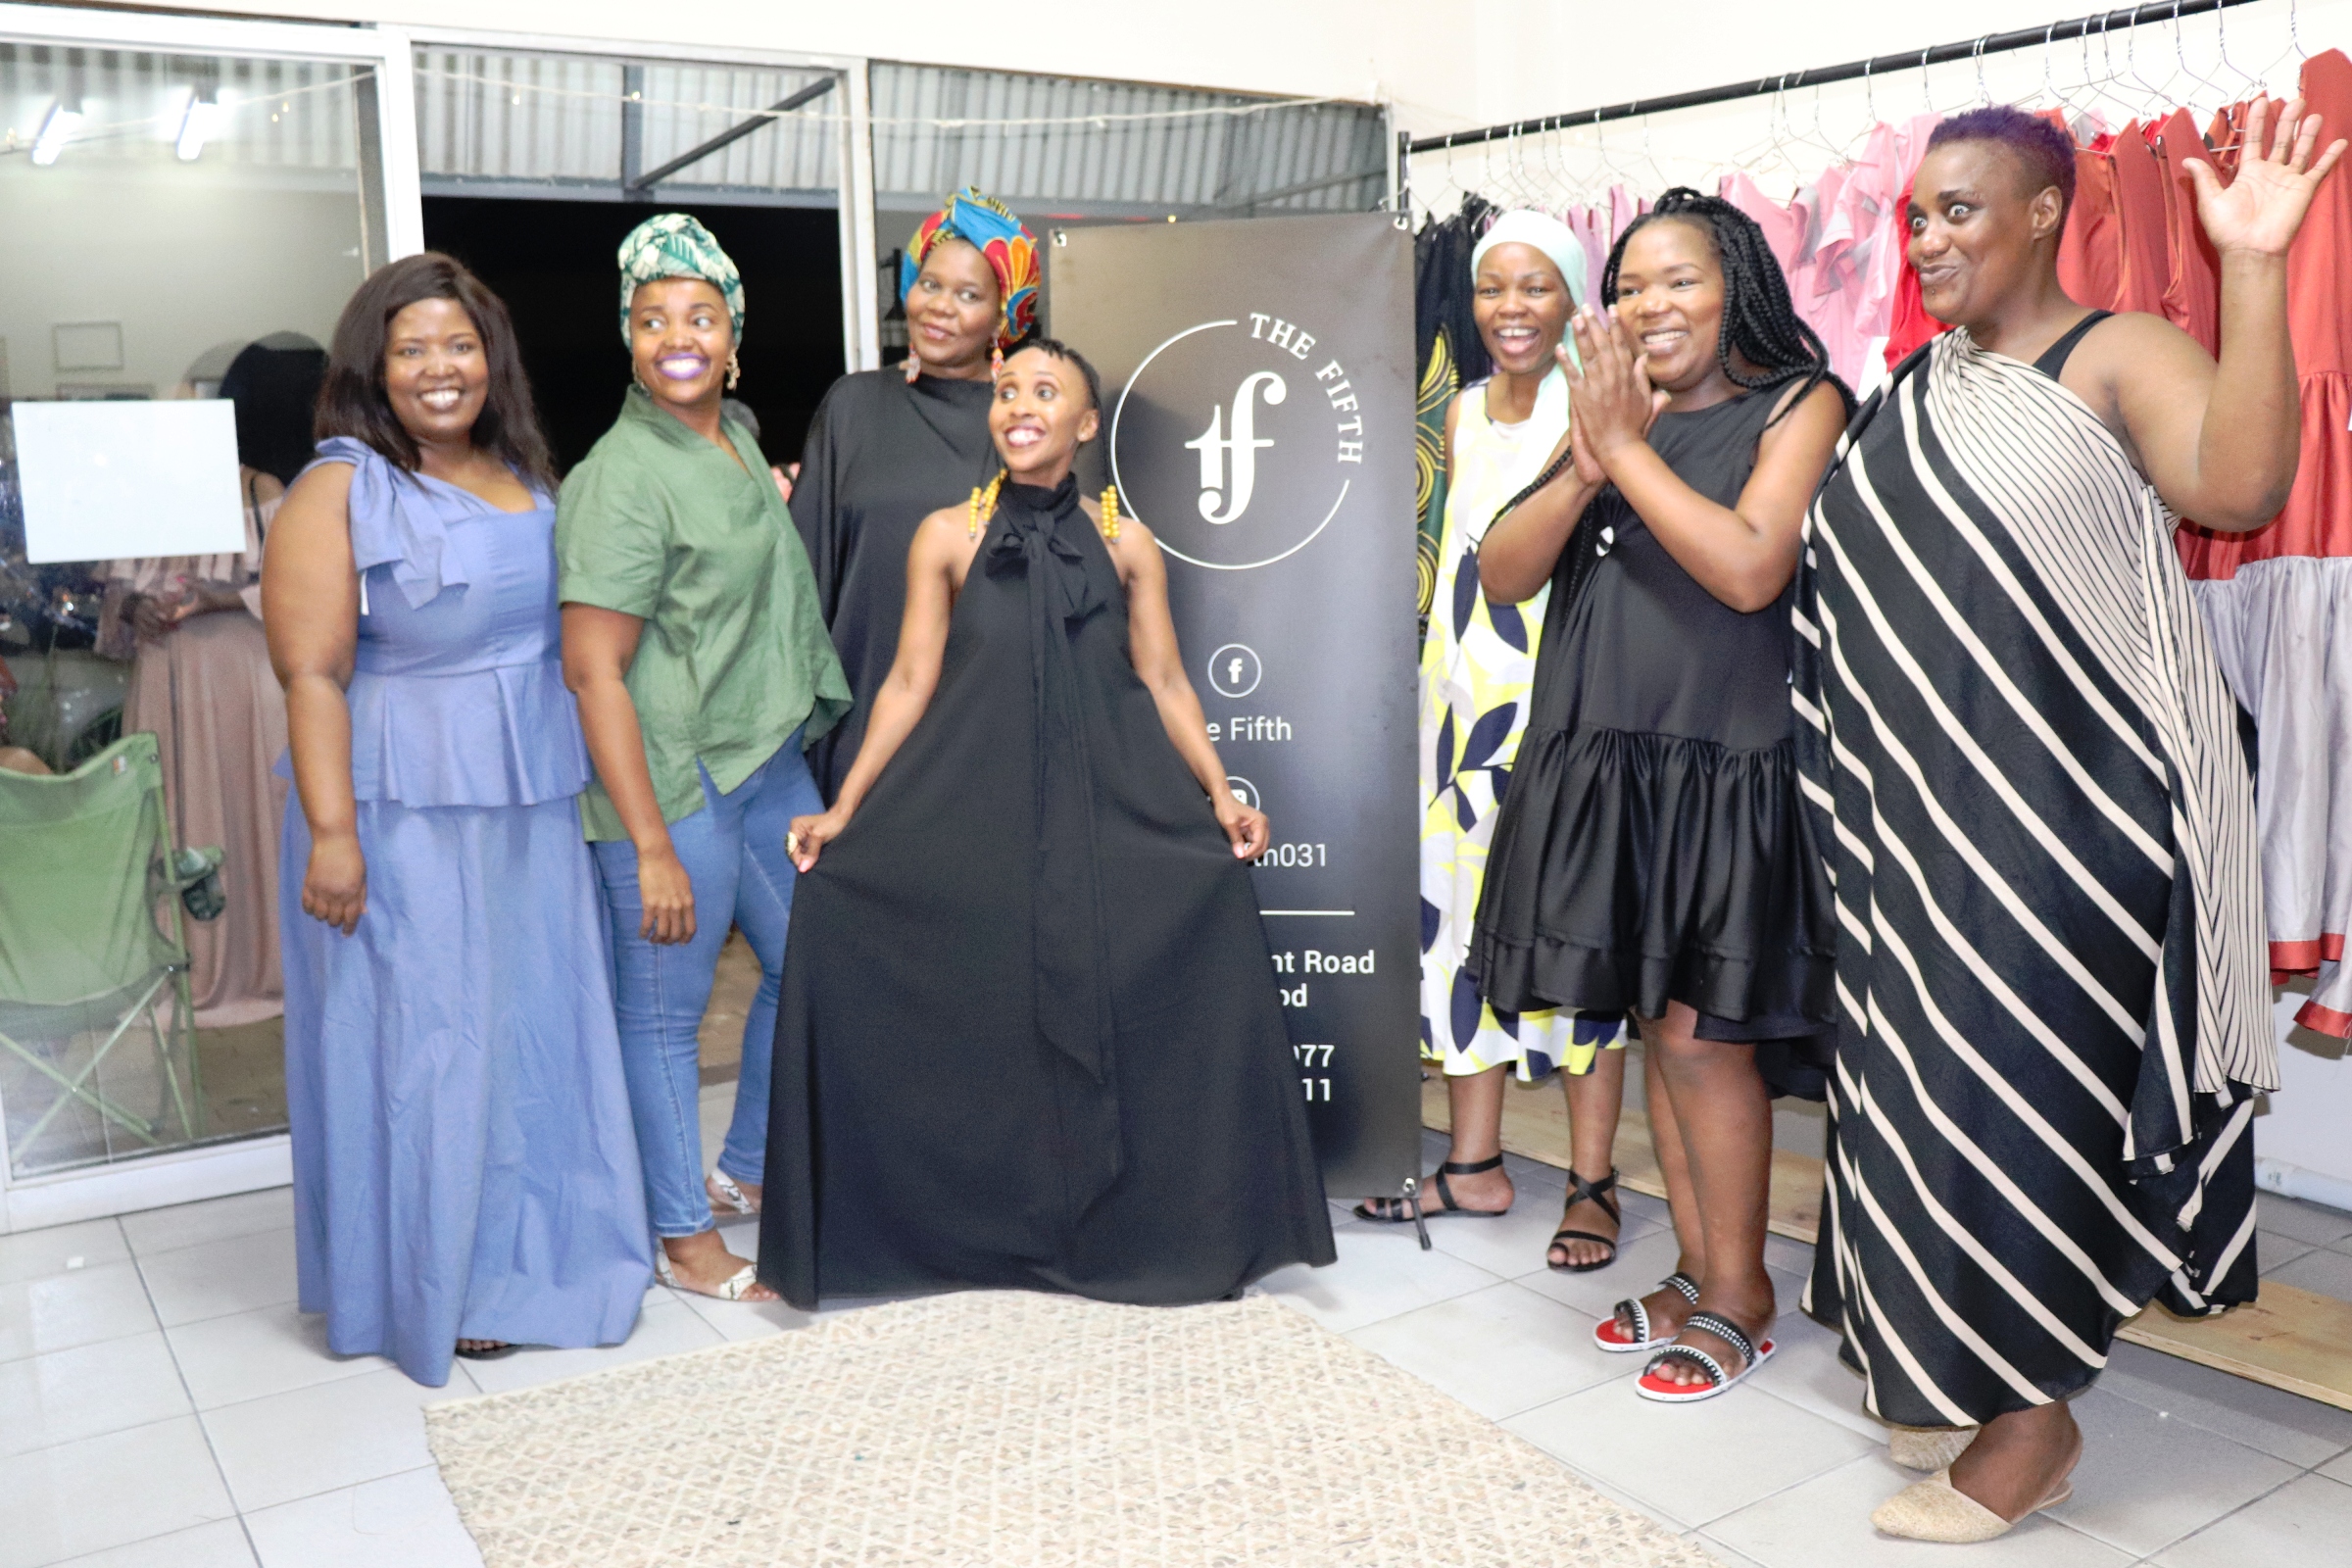 Six fashionistas jointly launch 'The Fifth' clothing shop!